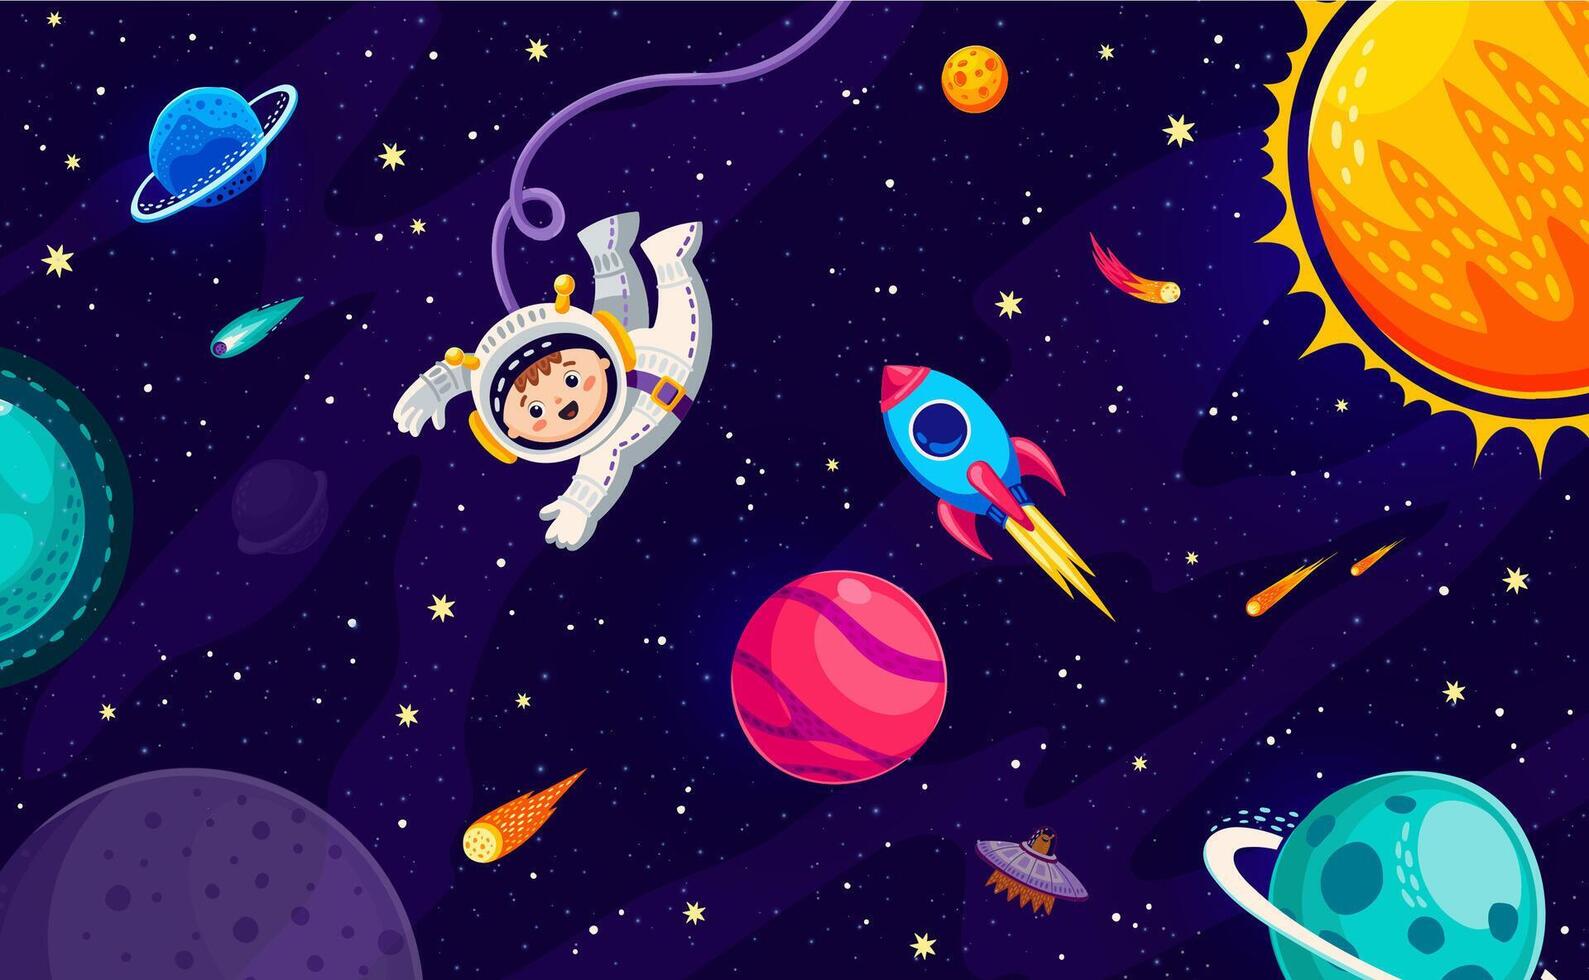 Cartoon boy astronaut in outer space near planets vector